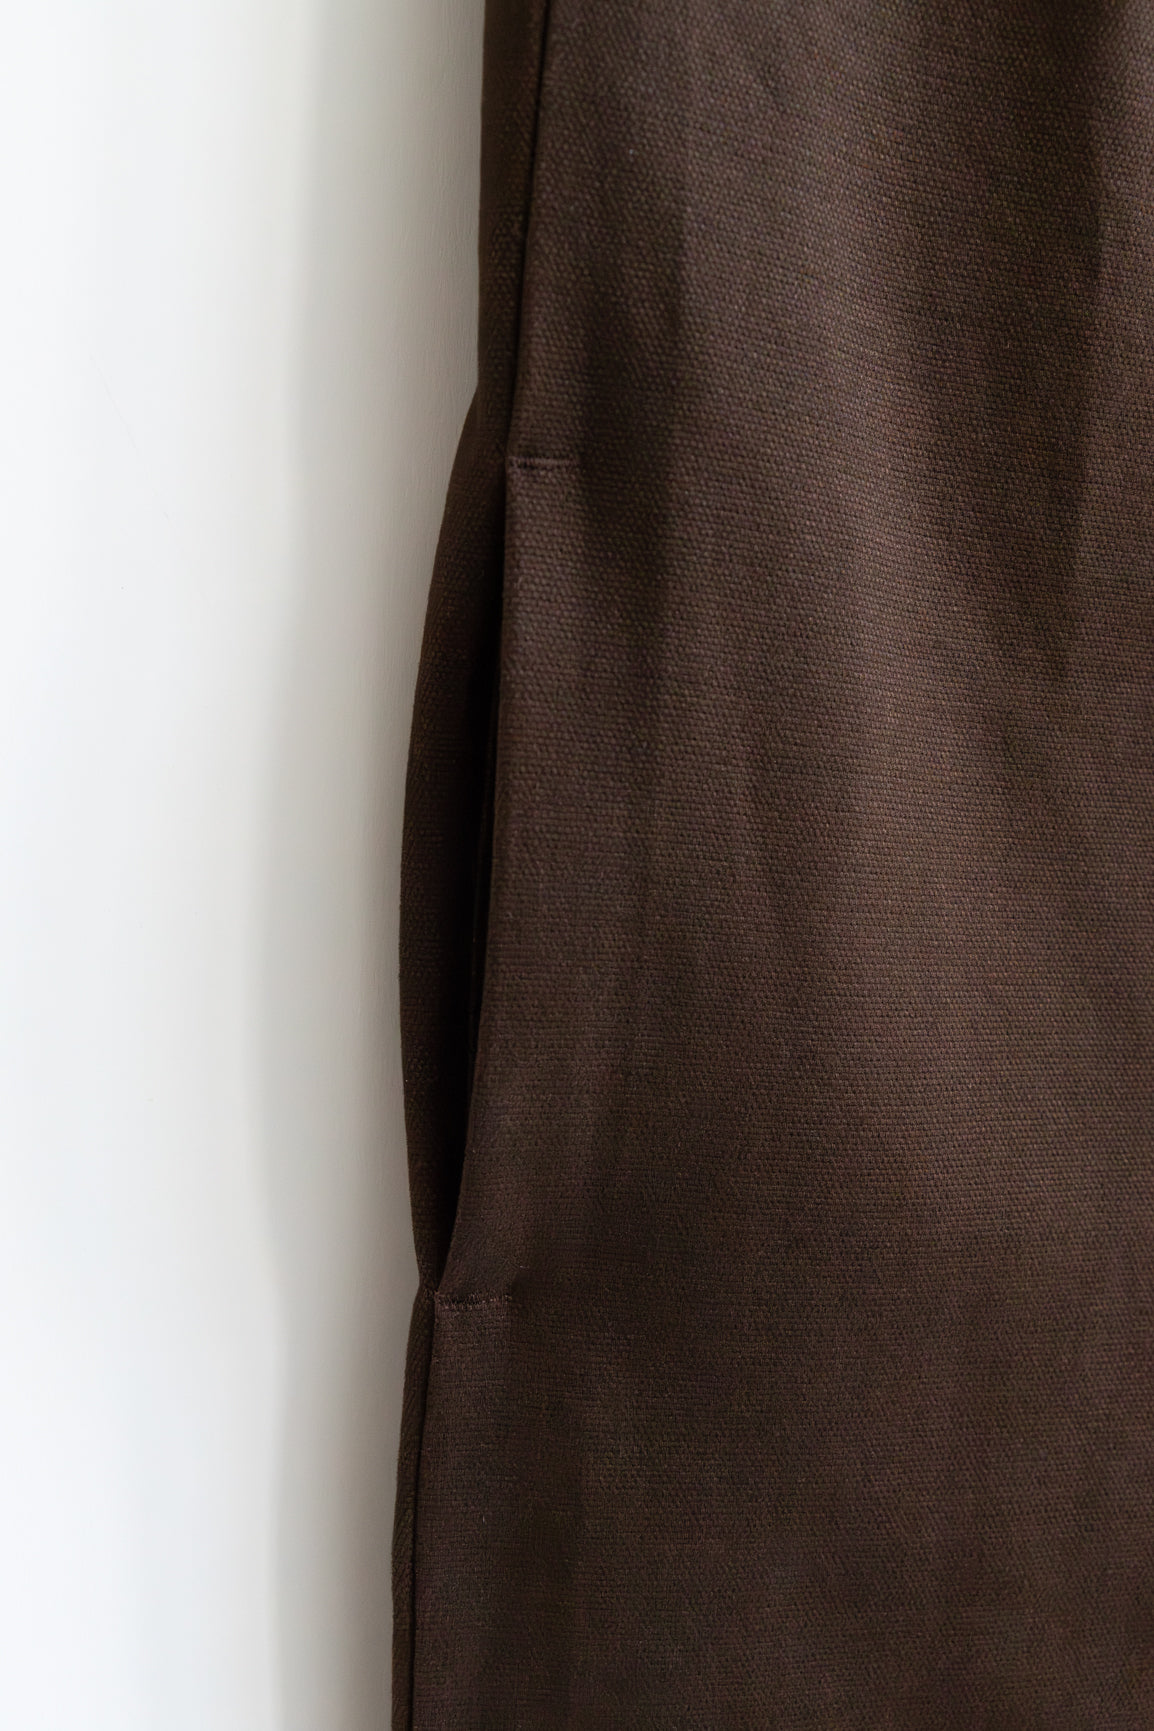 Dark Brown umber chocolate color Jumpsuit overall workwear cotton canvas with pockets 5 buttons v-neck tall girls short girls oeko-tex sustainable clothes handmade